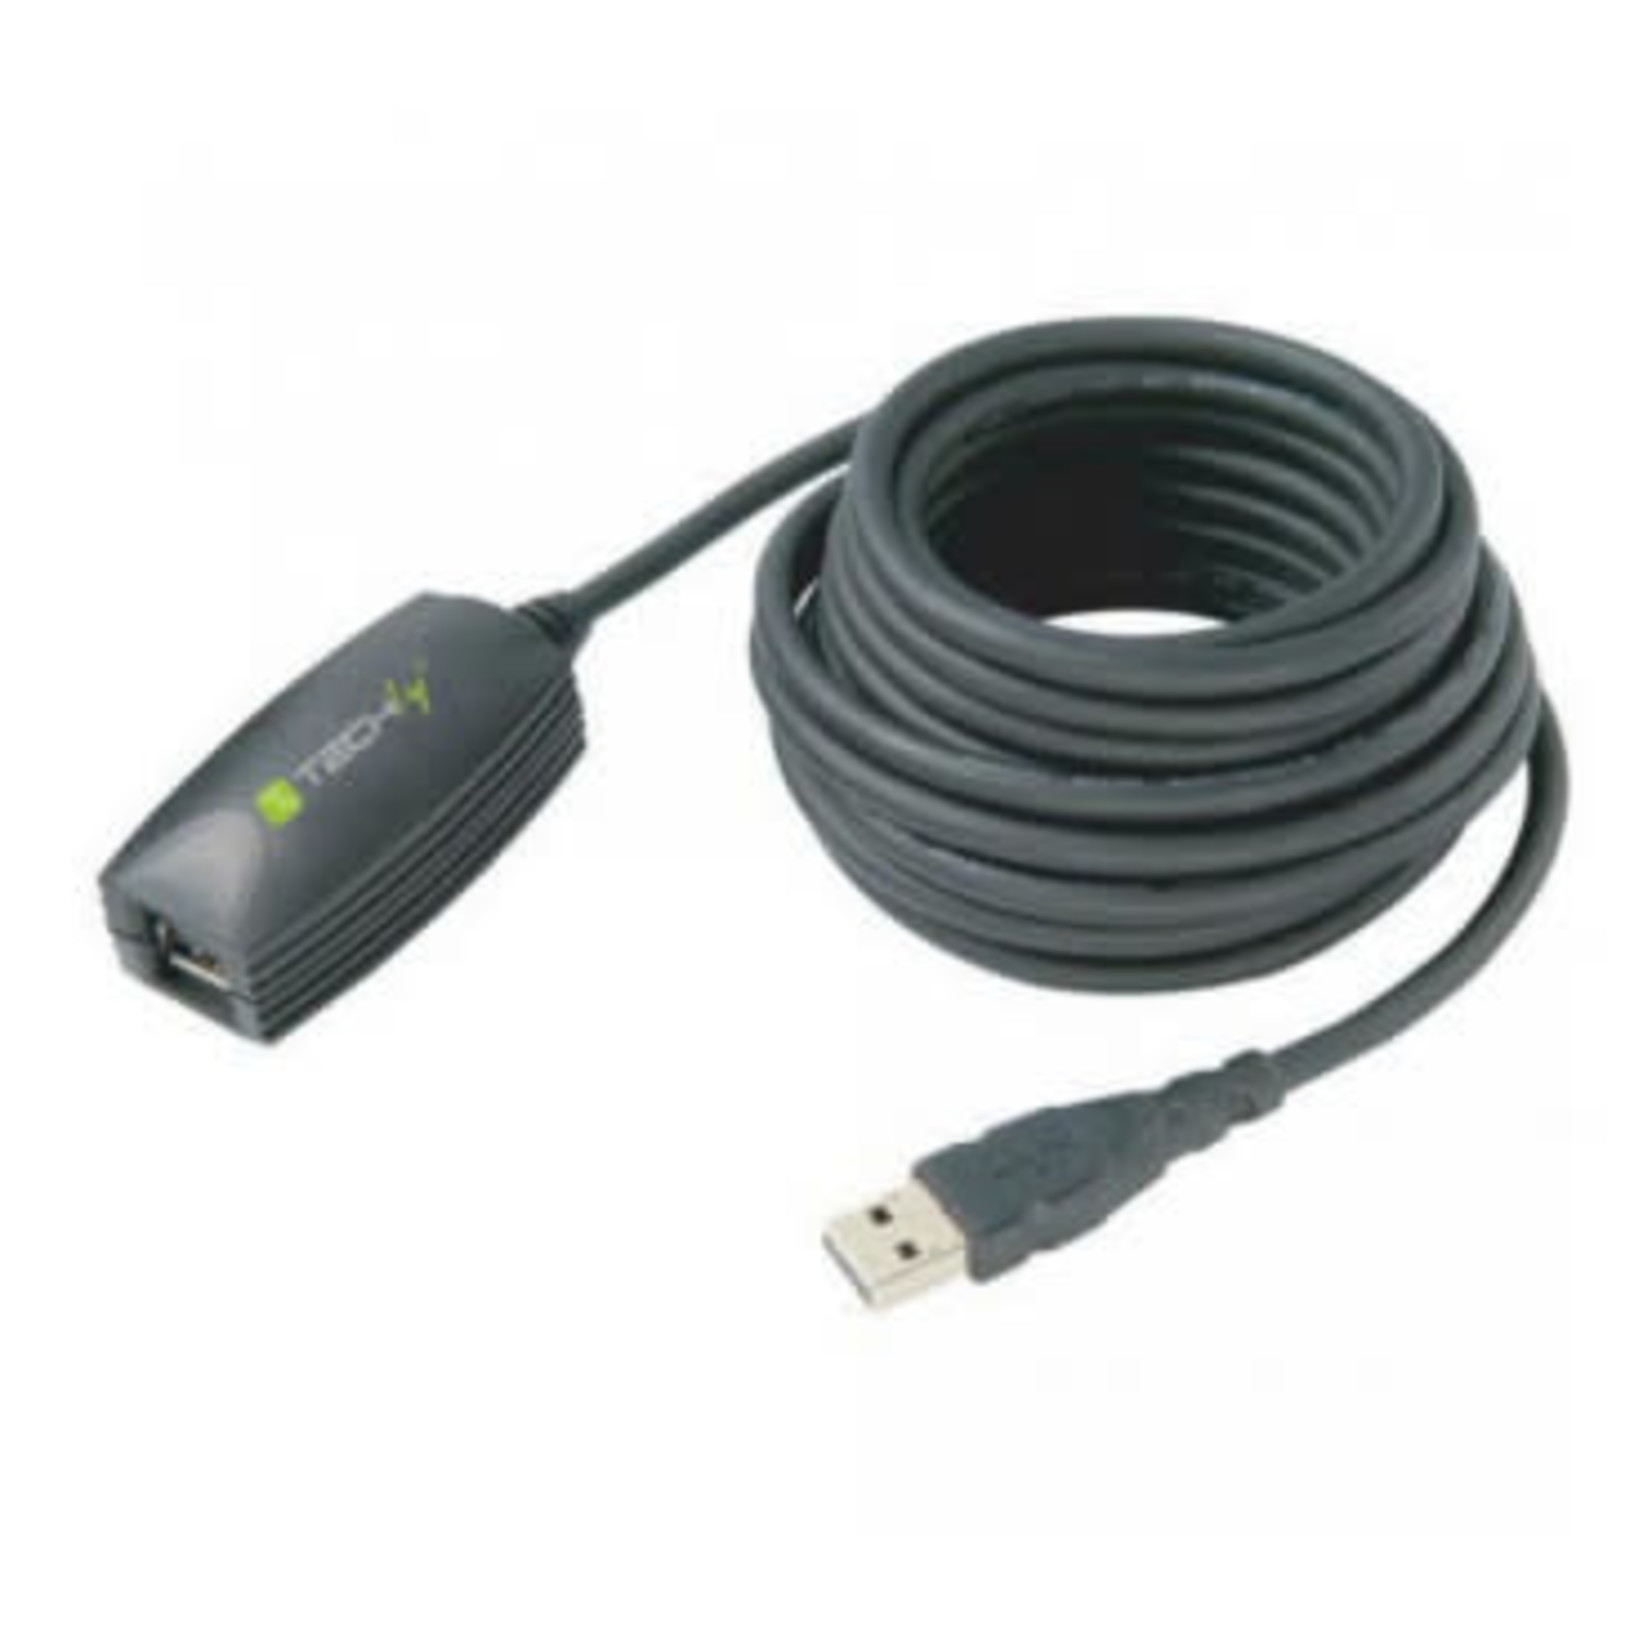 Techly Techly USB3 SuperSpeed Active Extension 5 Meter Cable